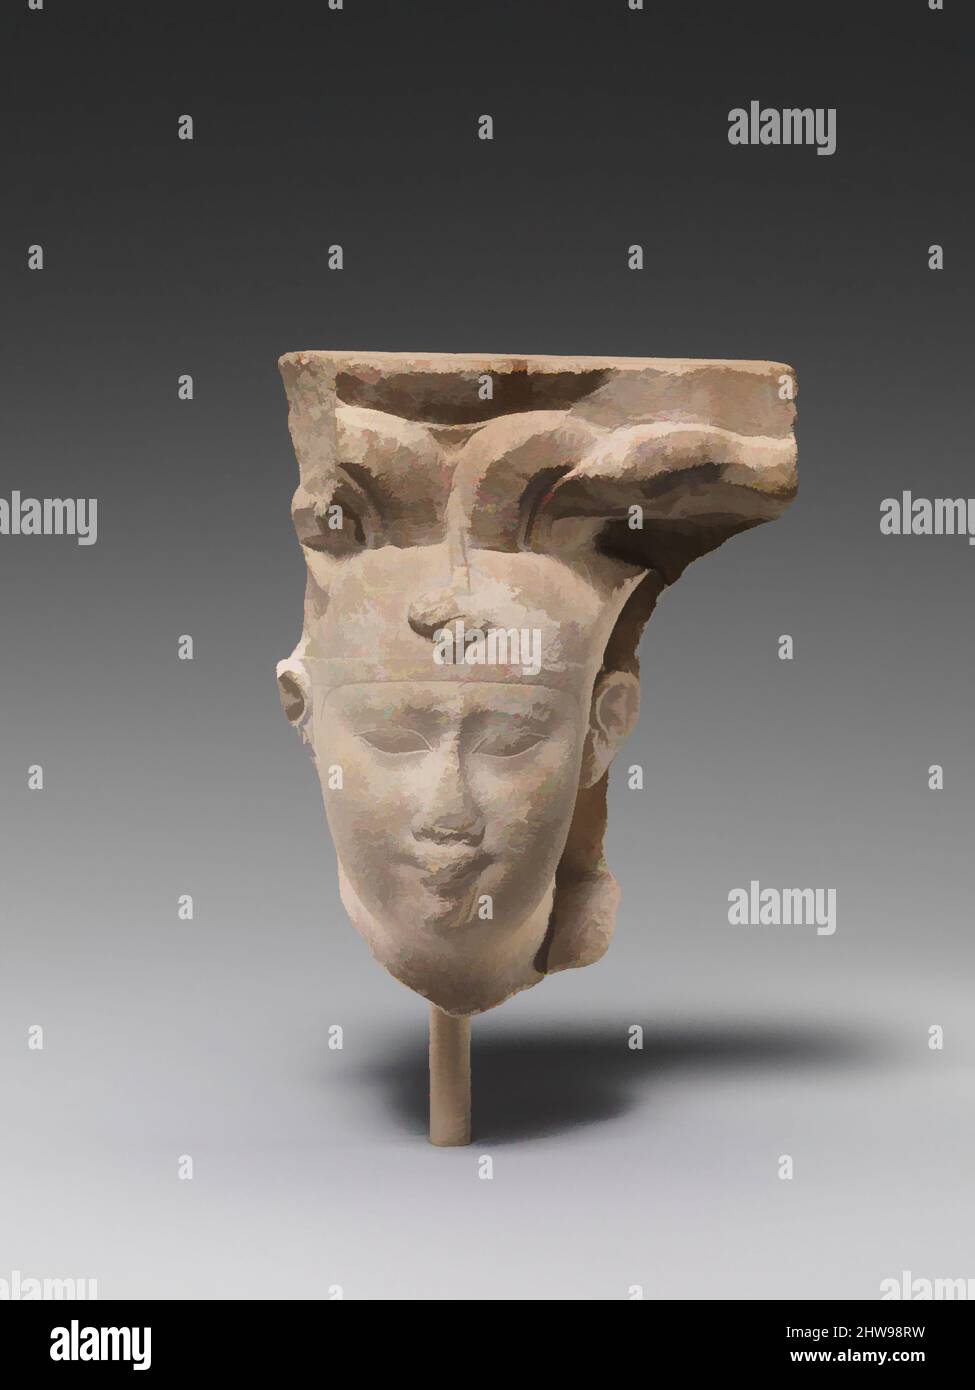 Art inspired by Royal head with an atypical snake and a headdress, Late Period–Ptolemaic Period, 400–200 B.C., From Egypt, Limestone, H. 10.3 × W. 8 × D. 4.5 cm (4 1/16 × 3 1/8 × 1 3/4 in.), The head is one of a class of objects referred to by the double designation sculptor's model, Classic works modernized by Artotop with a splash of modernity. Shapes, color and value, eye-catching visual impact on art. Emotions through freedom of artworks in a contemporary way. A timeless message pursuing a wildly creative new direction. Artists turning to the digital medium and creating the Artotop NFT Stock Photo